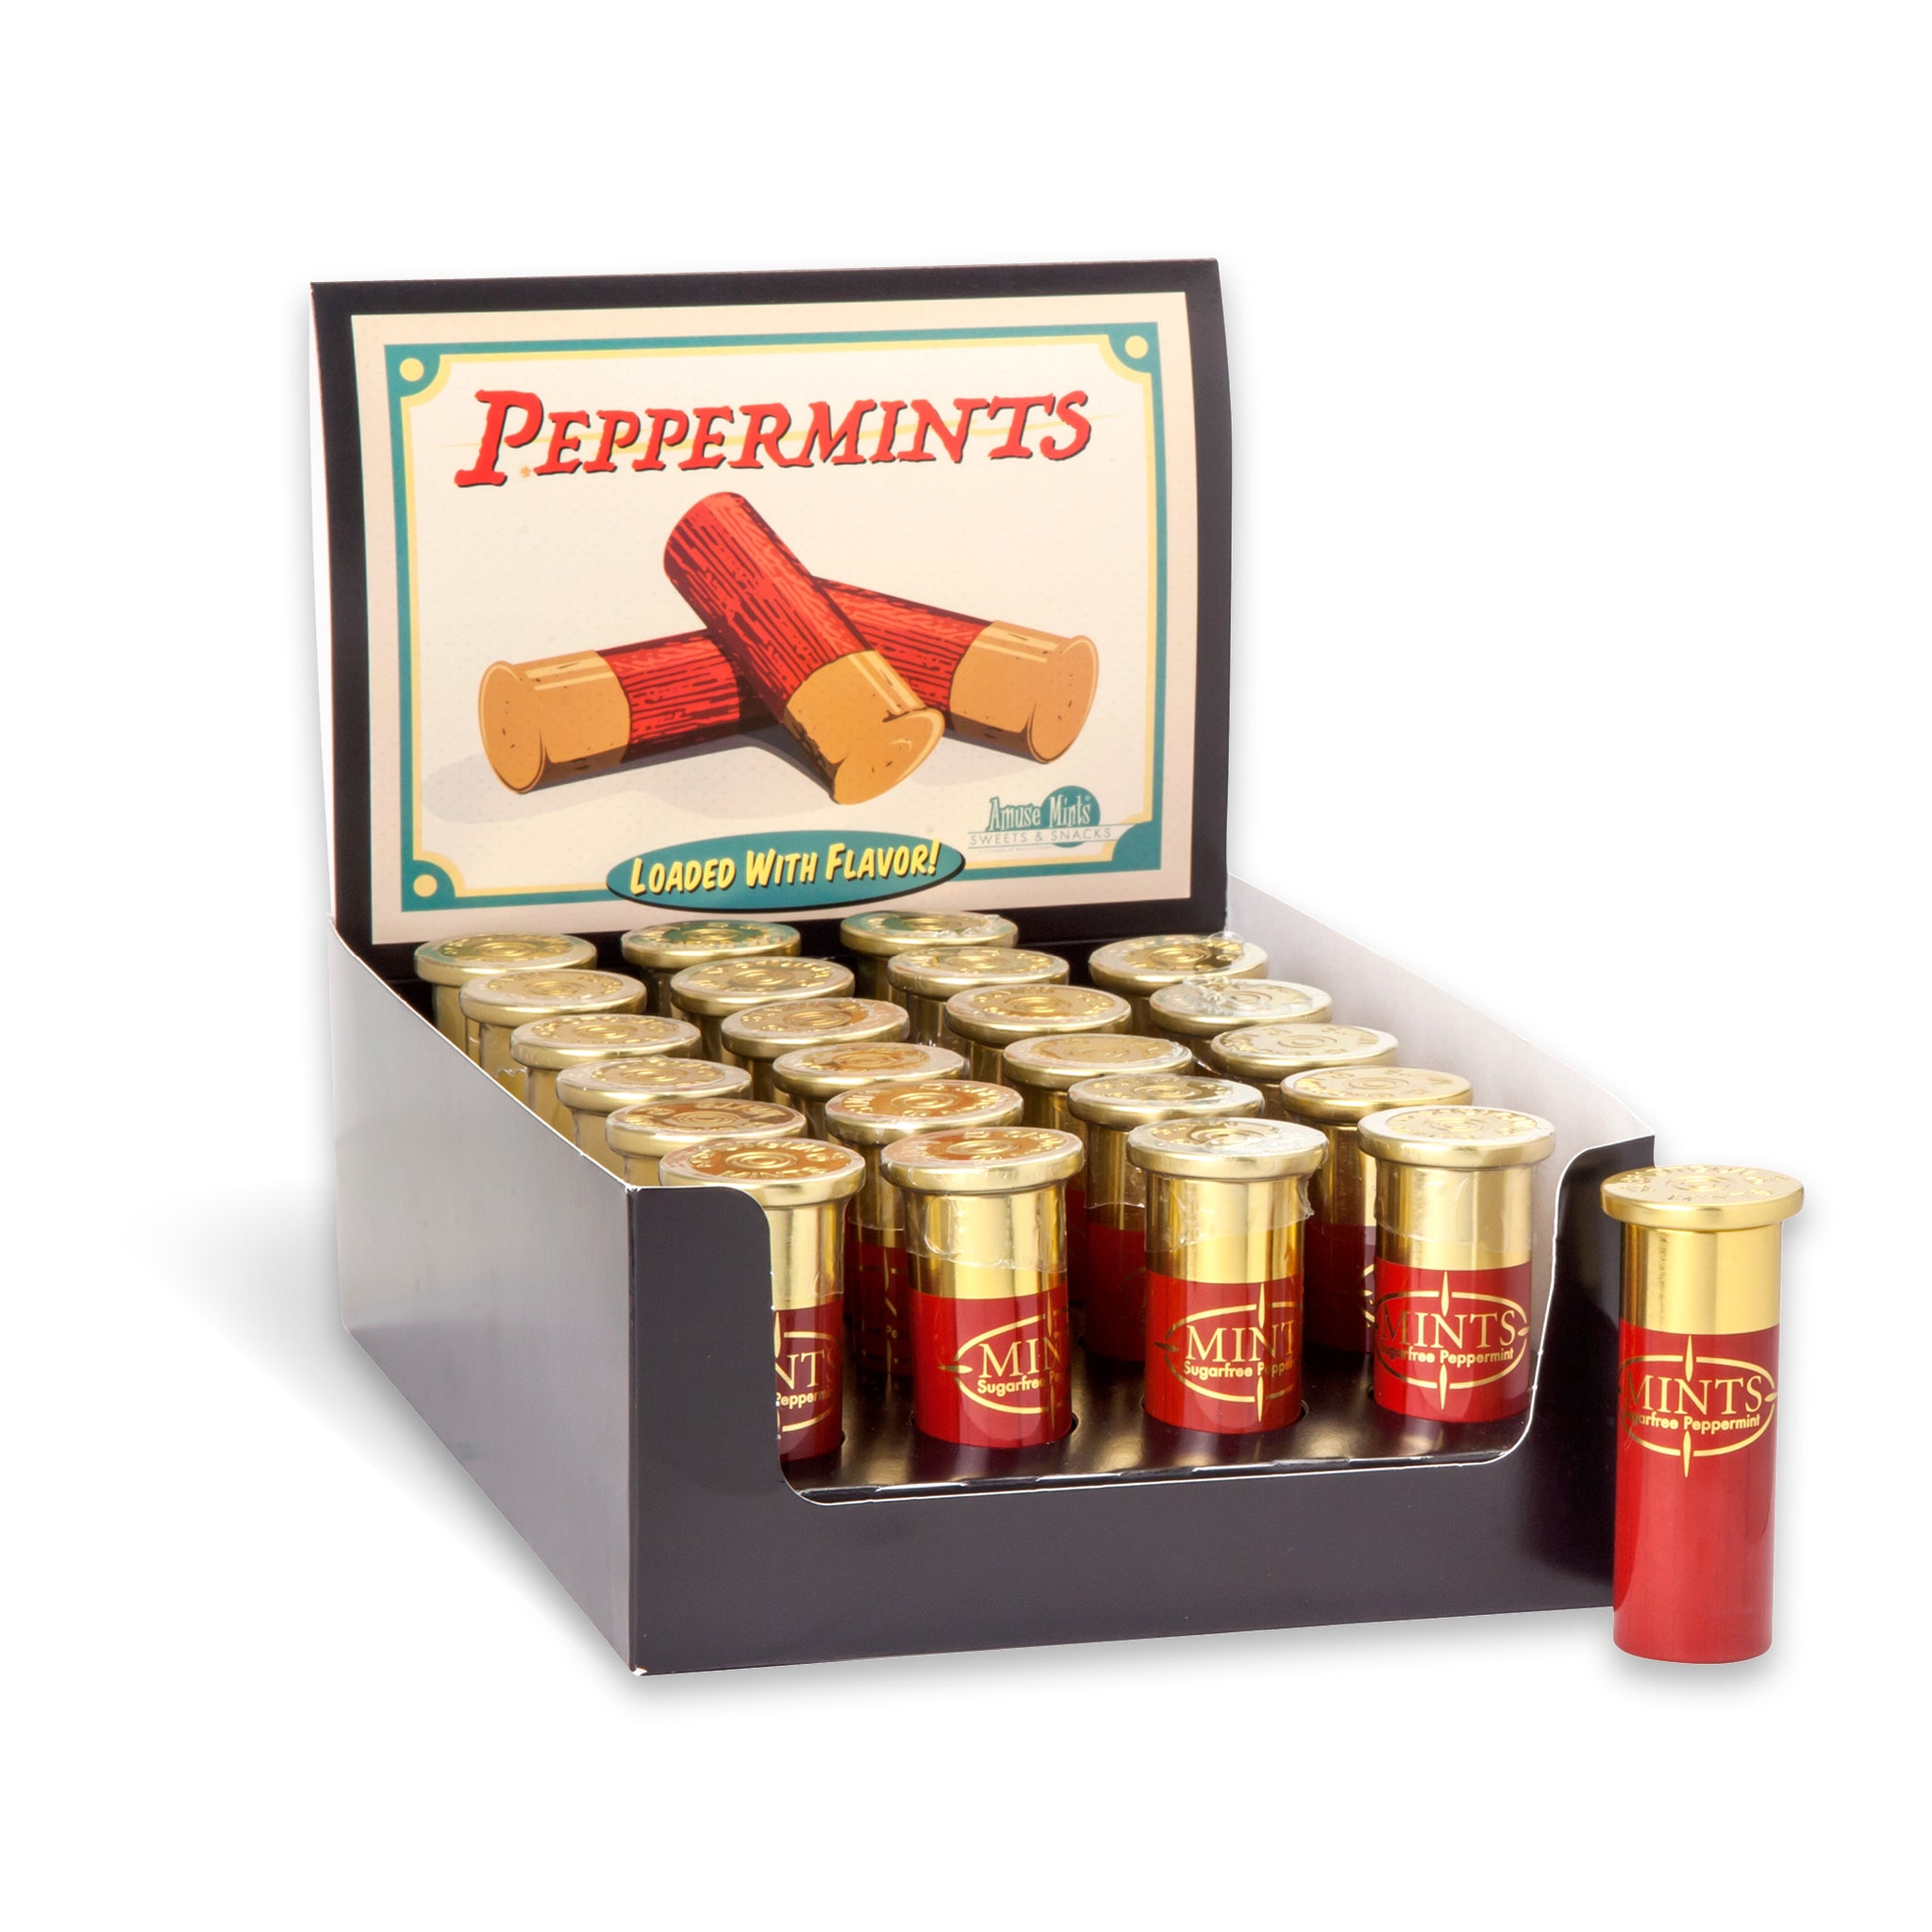 Shotgun Shell Mint Tin  AmuseMints Sweets and Snacks - USA-Made Mints,  Chocolate, Specialty Confections, Custom Printed Tins, Boxes and Bags.